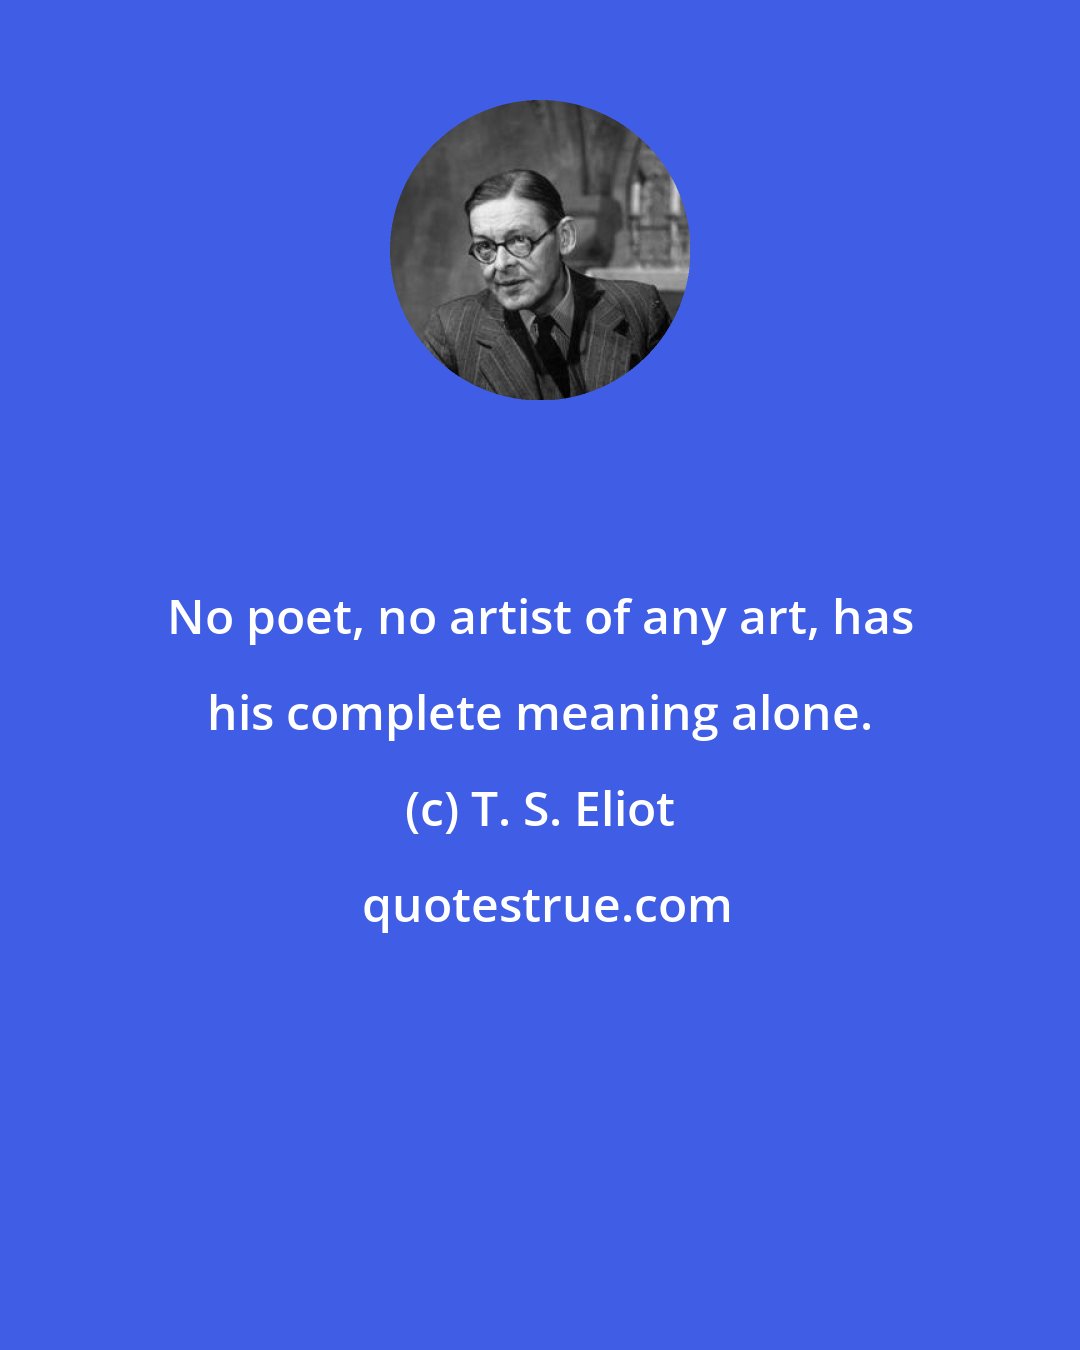 T. S. Eliot: No poet, no artist of any art, has his complete meaning alone.